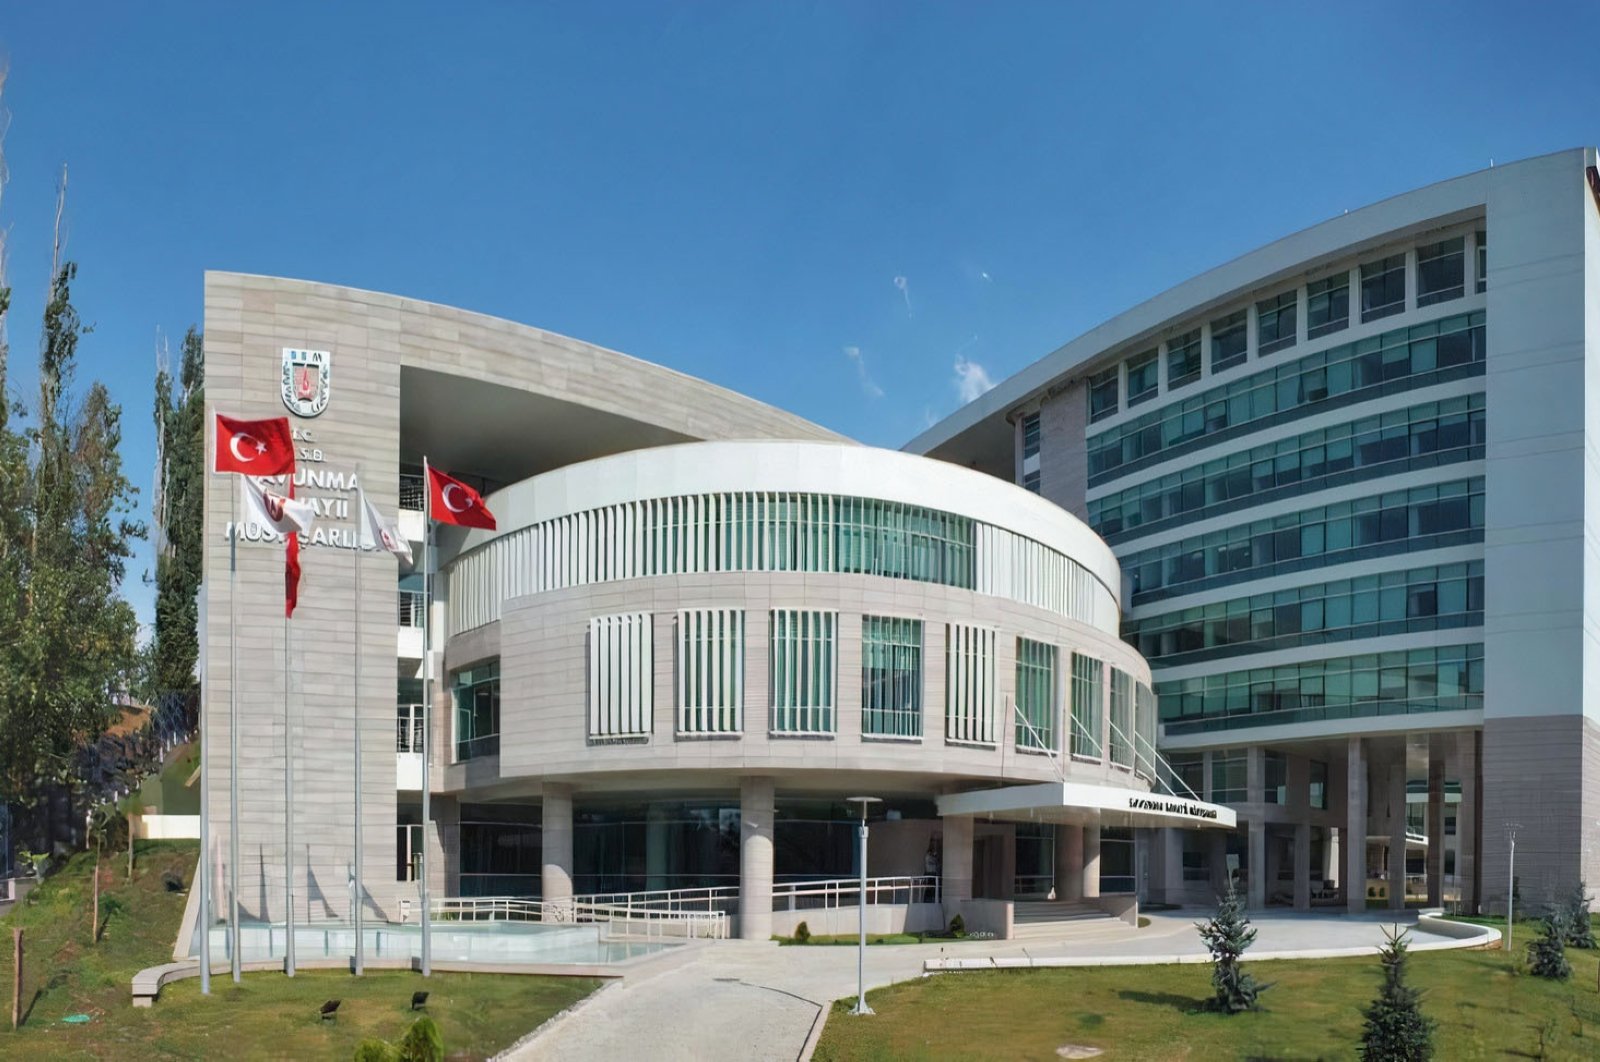 The headquarters of the Presidency of Defense Industry (SSB) seen in this undated file photo, capital Ankara, Turkey. (Courtesy of SSB)